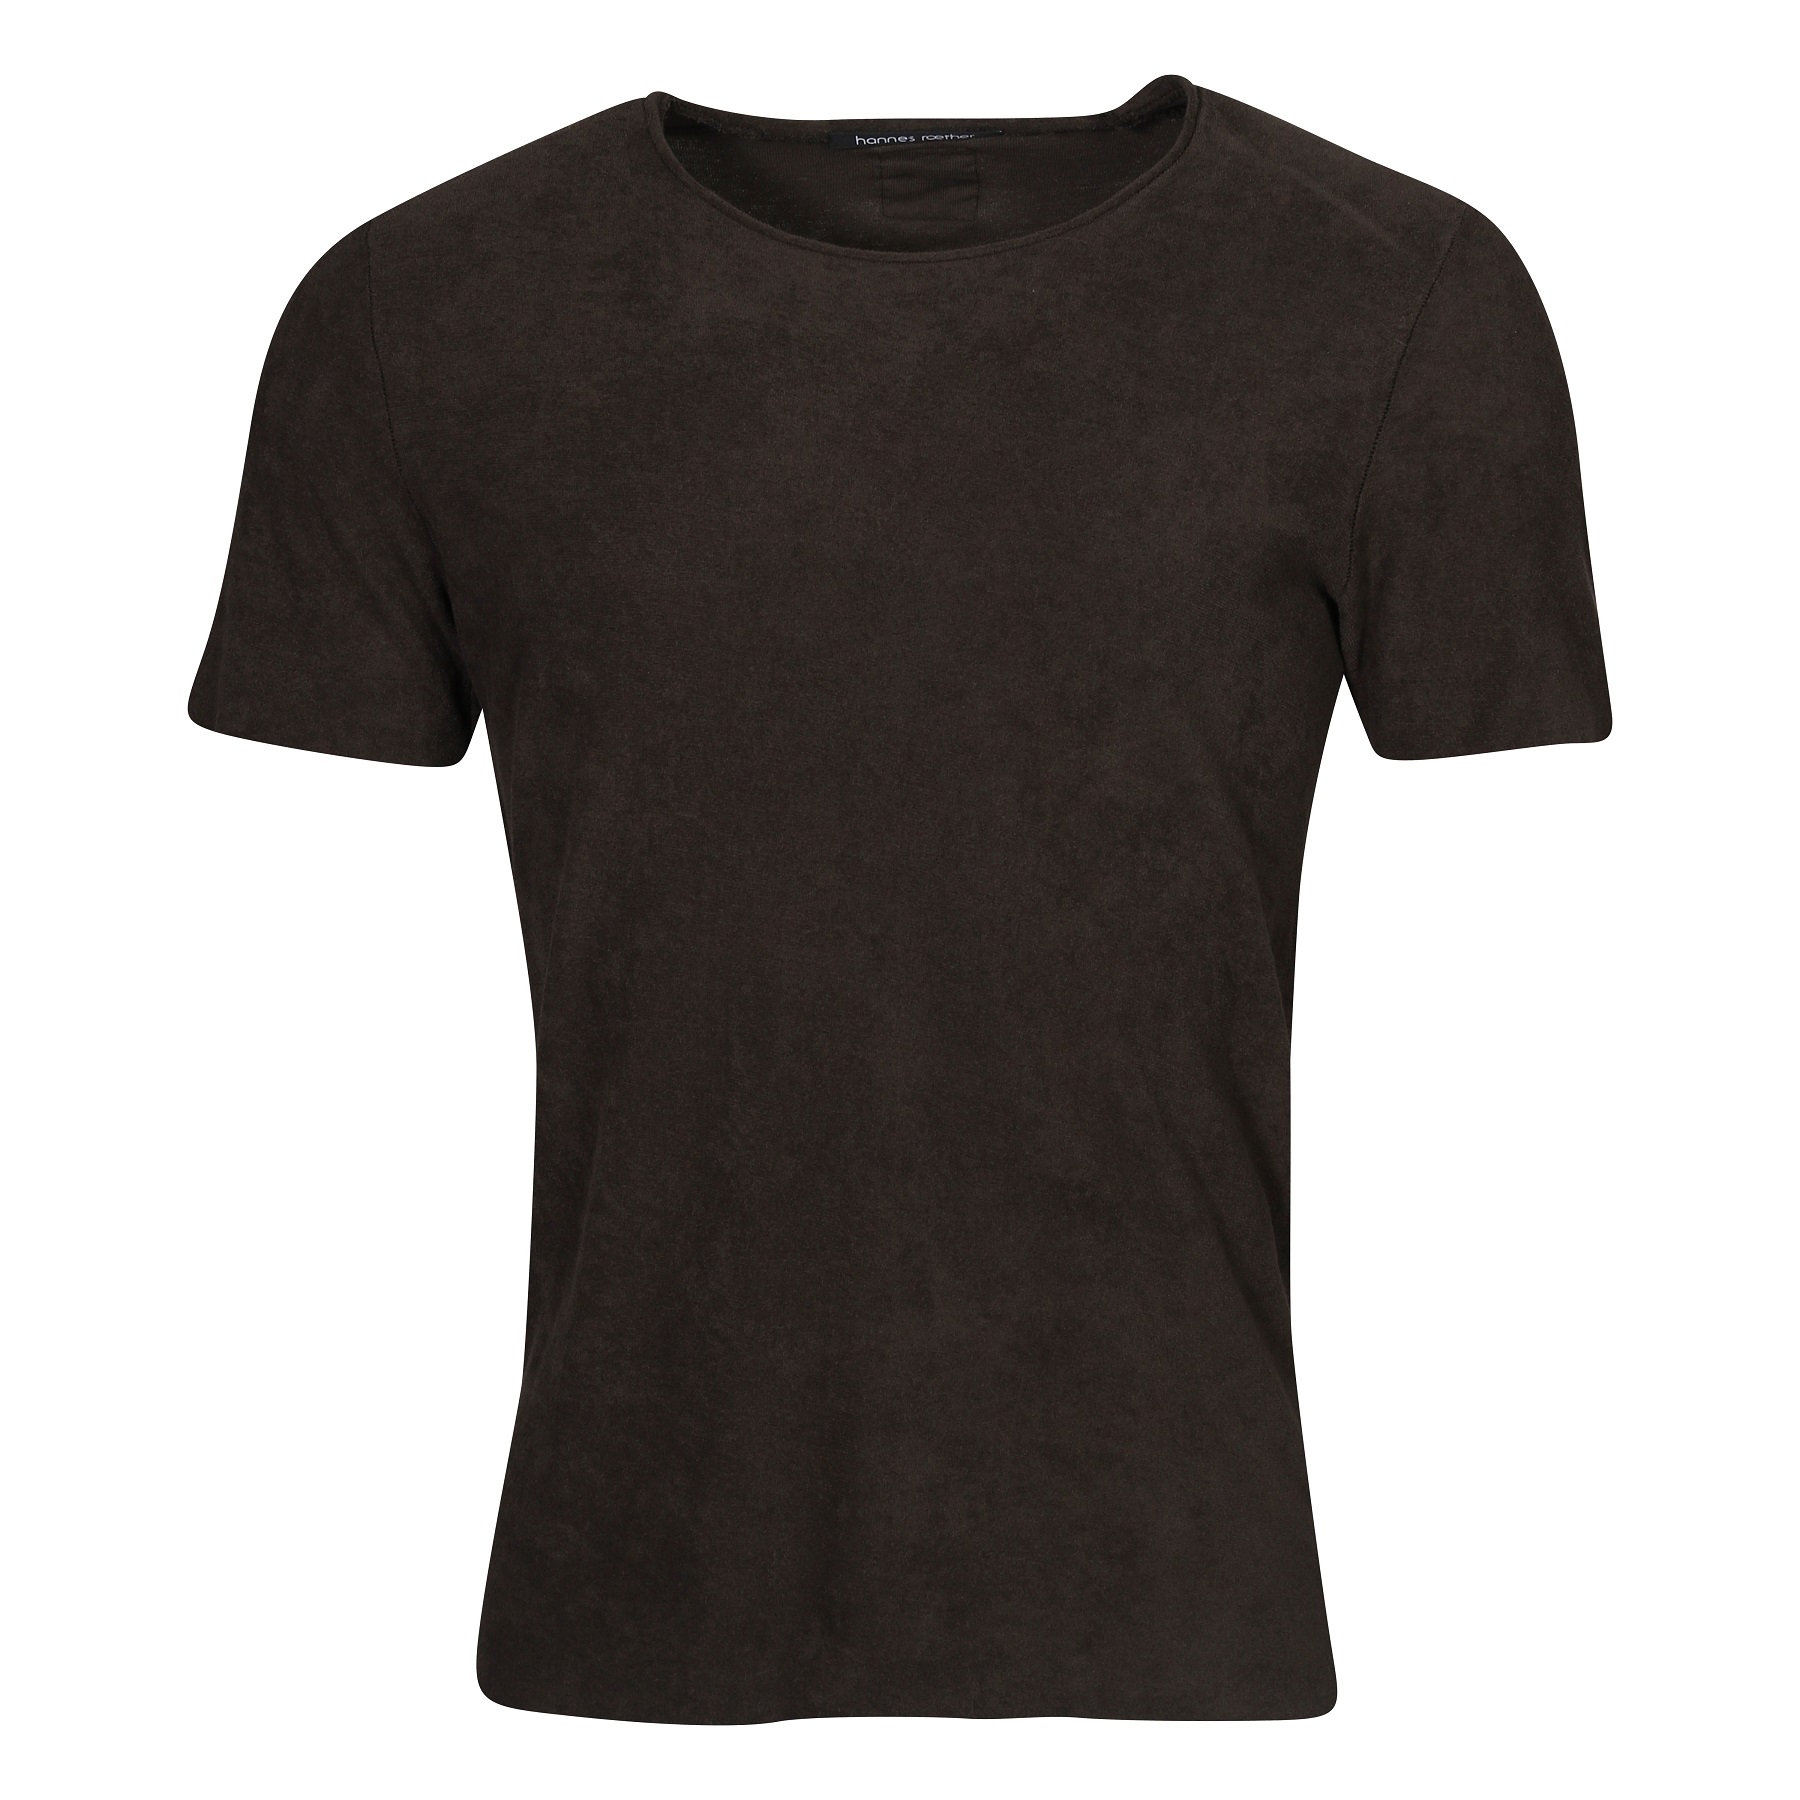 HANNES ROETHER Terry T-Shirt in Brown XL